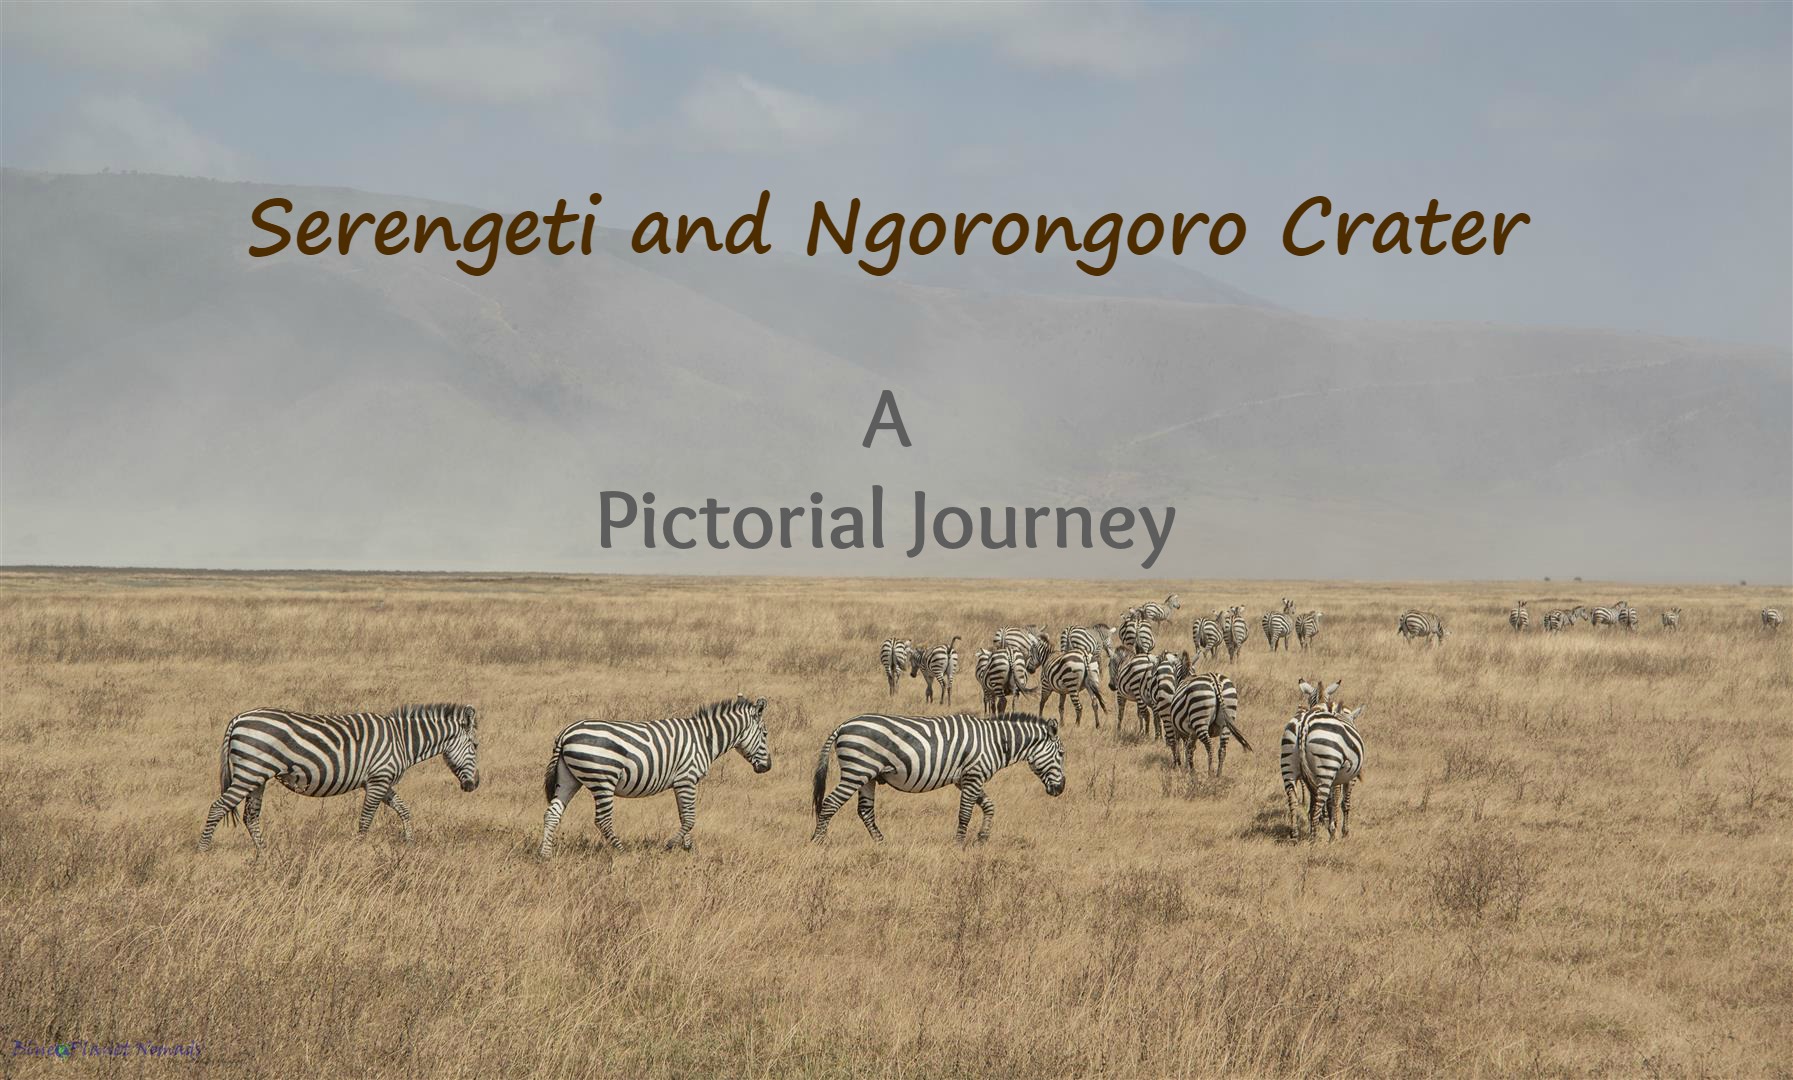 The Serengeti and Ngorongoro Crater – A Pictorial Journey